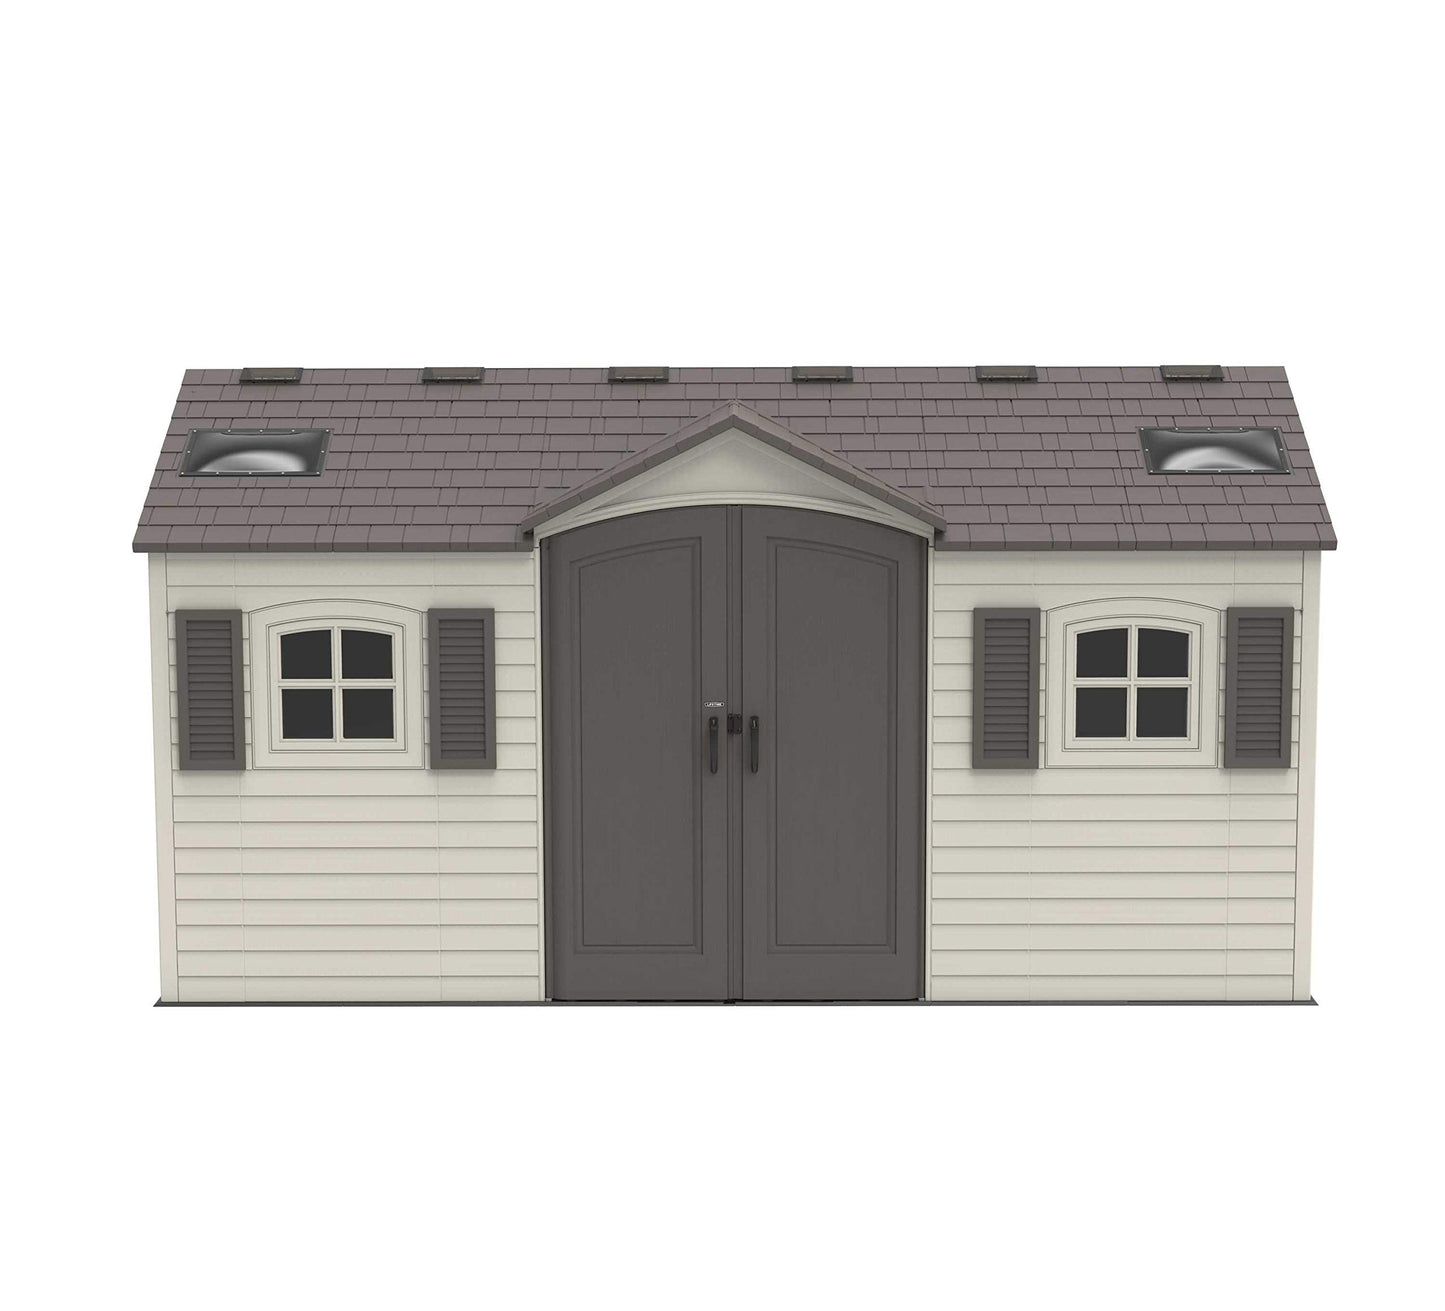 Lifetime 60079 Outdoor Storage Dual Entry Shed, 15 x 8 ft, Desert Sand